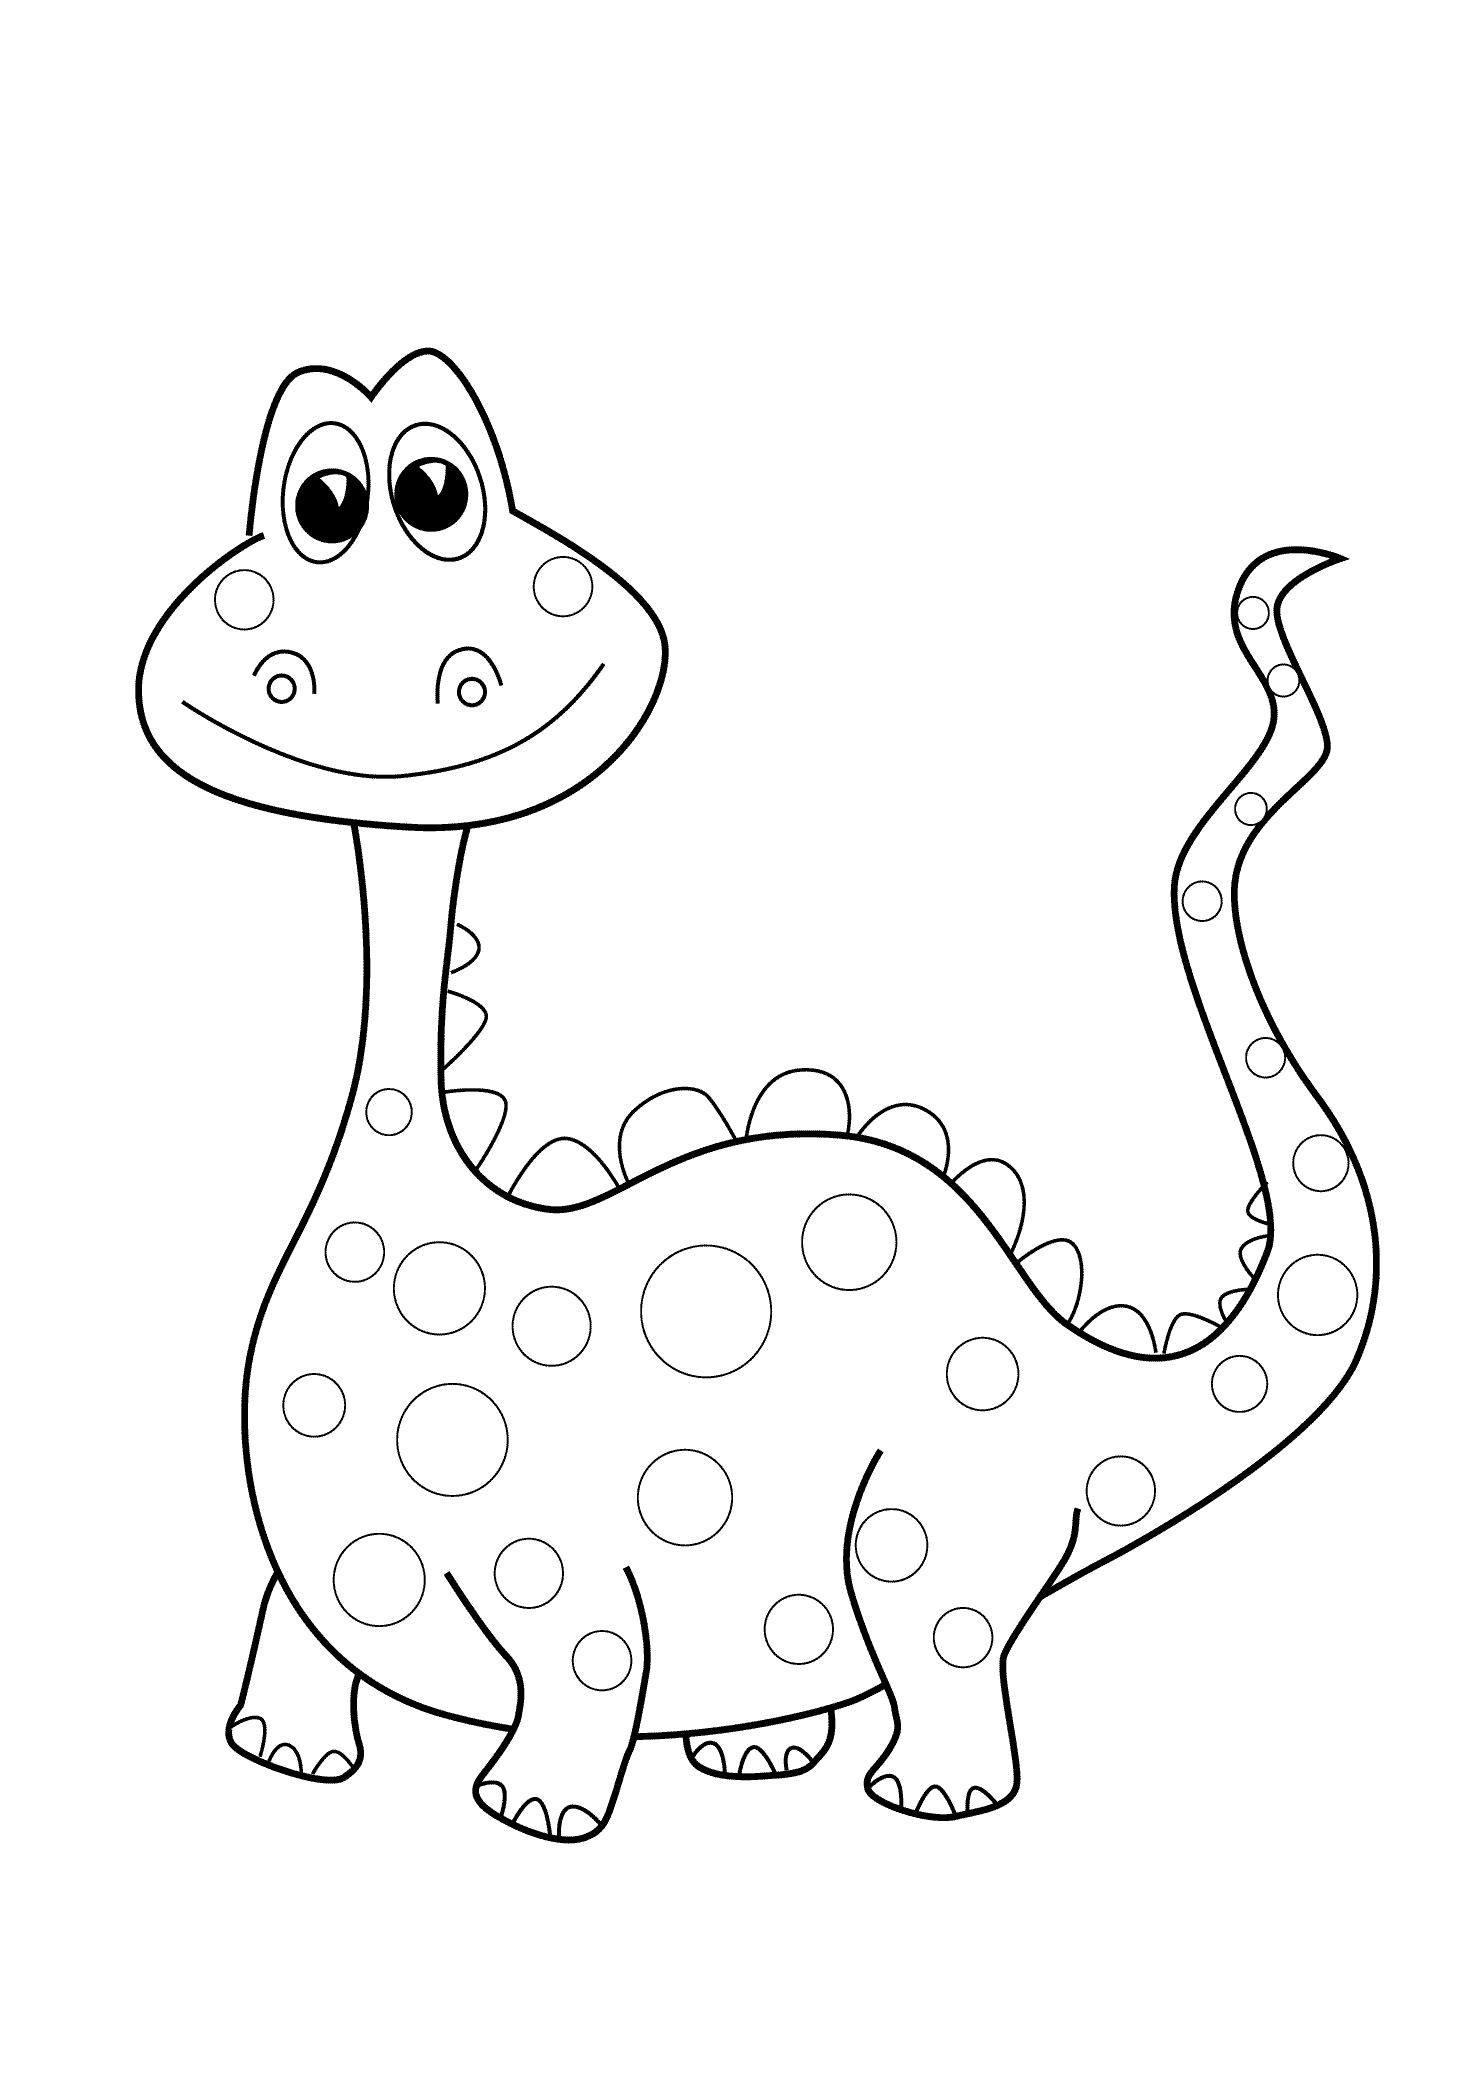 Funny Dinosaur coloring page for kids, printable free ...